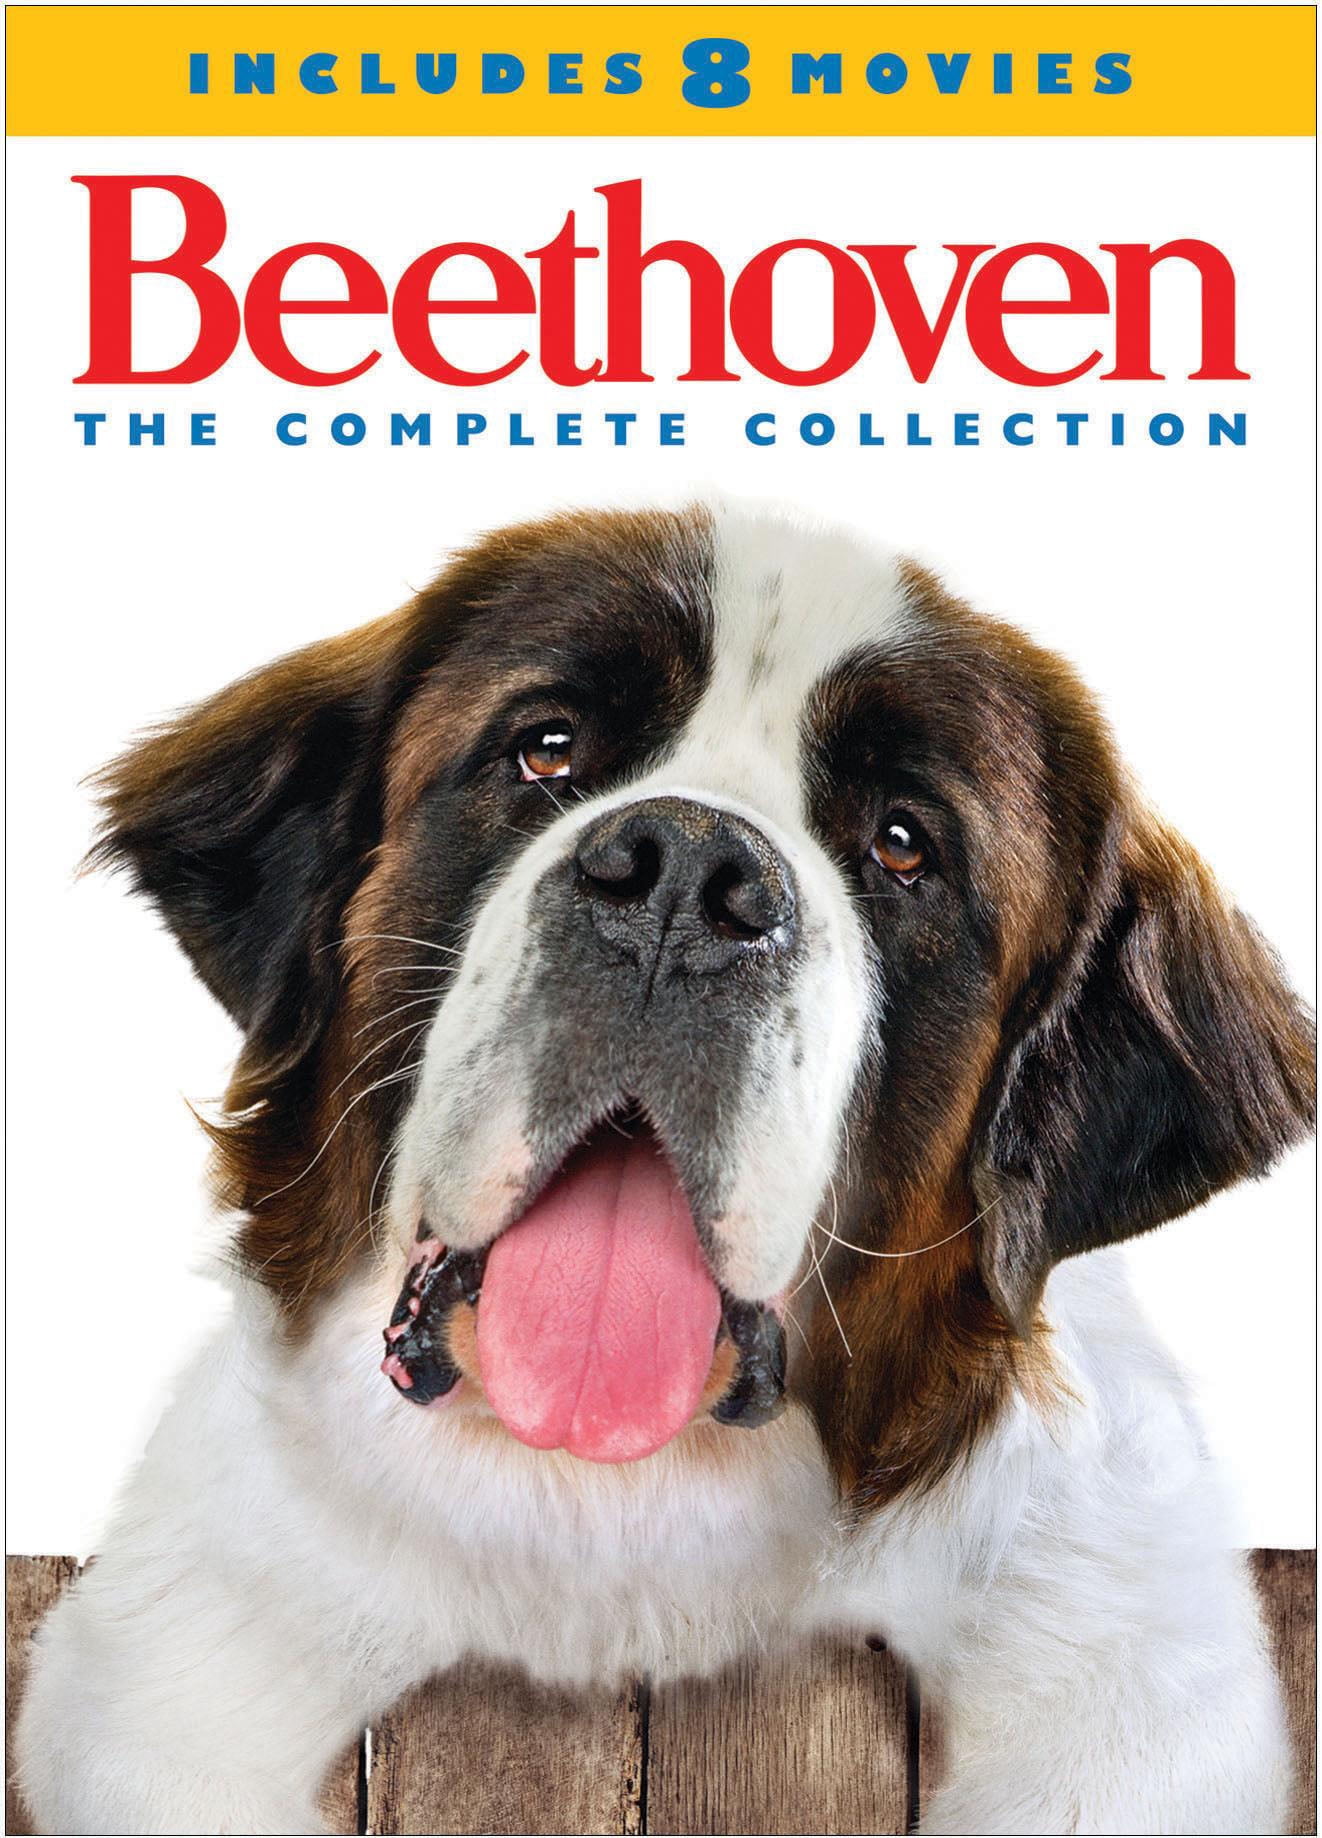 Beethoven: The Complete Collection (DVD)